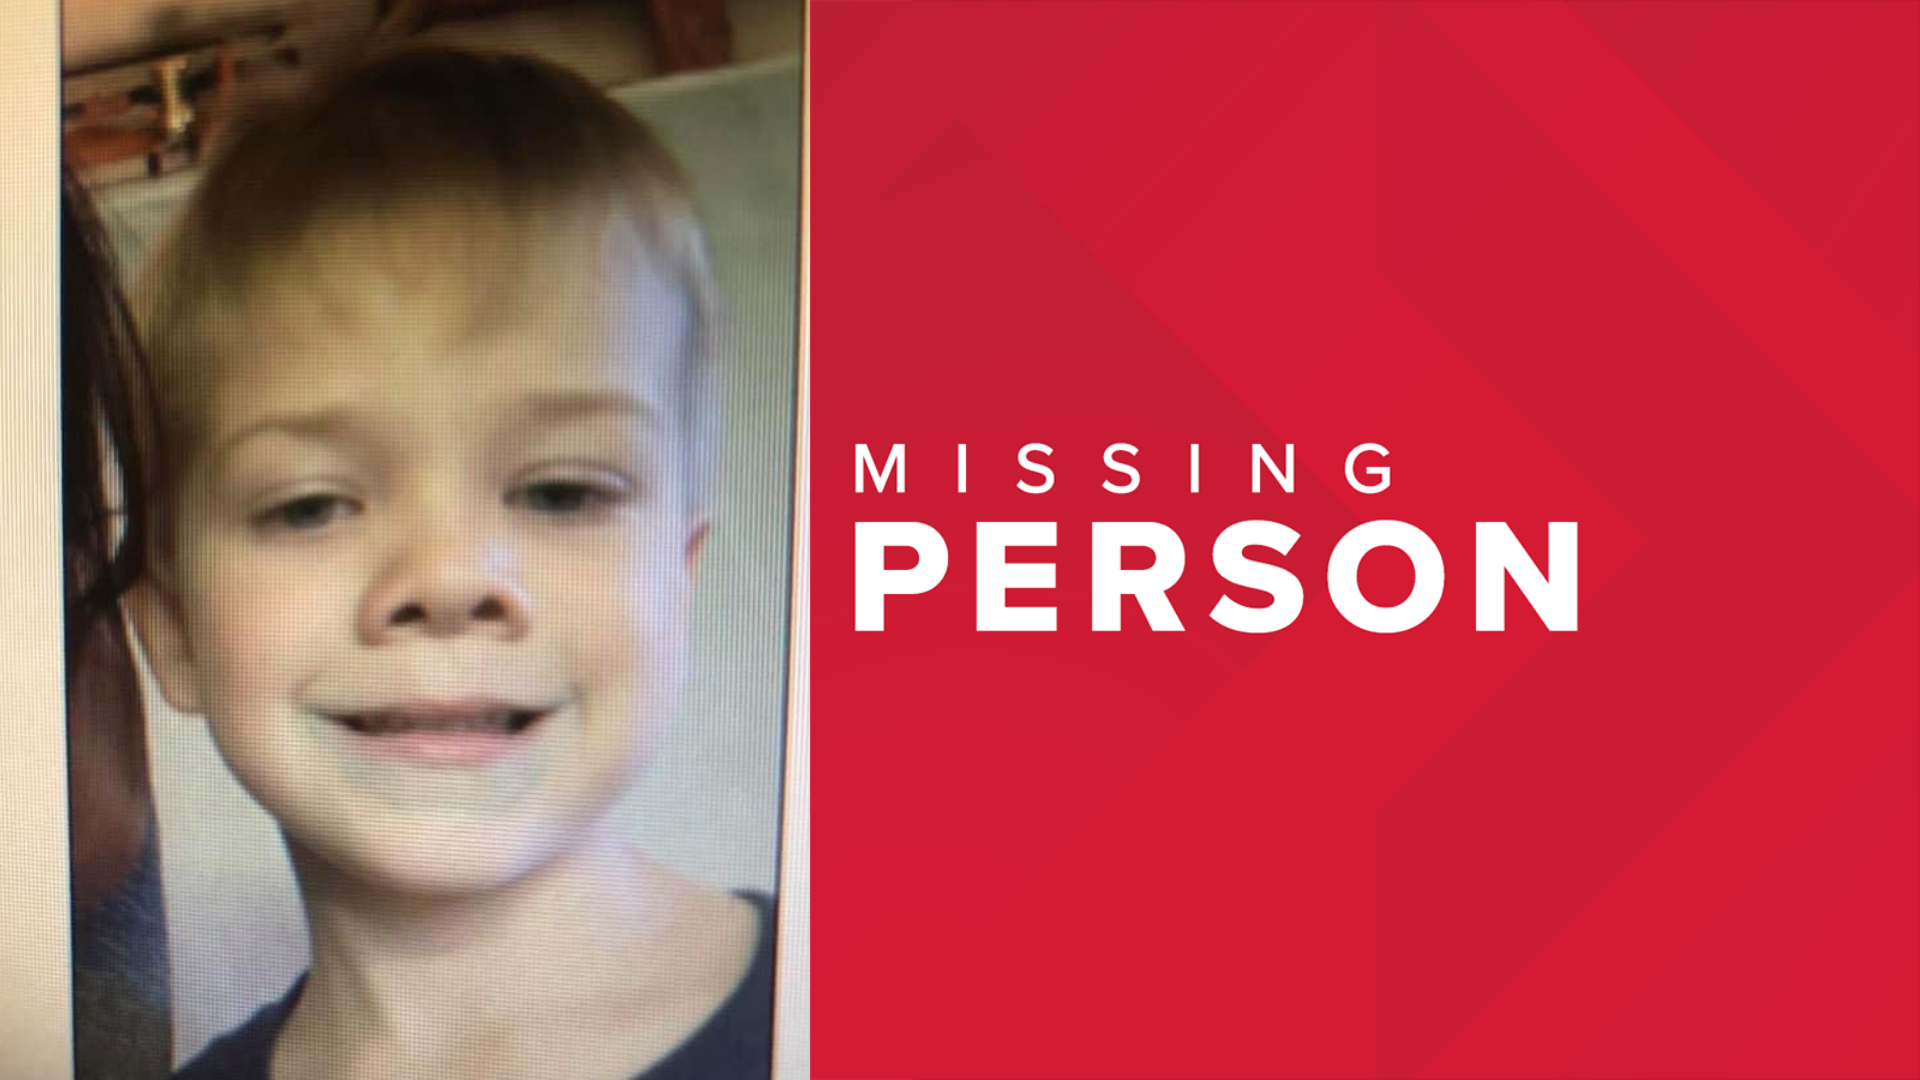 Michael Joseph Vaughan was last seen near SW 9th Street and S Arizona Ave. in Fruitland. Vaughan is 3' 07" and weighs 50 pounds, with blonde hair and blue eyes